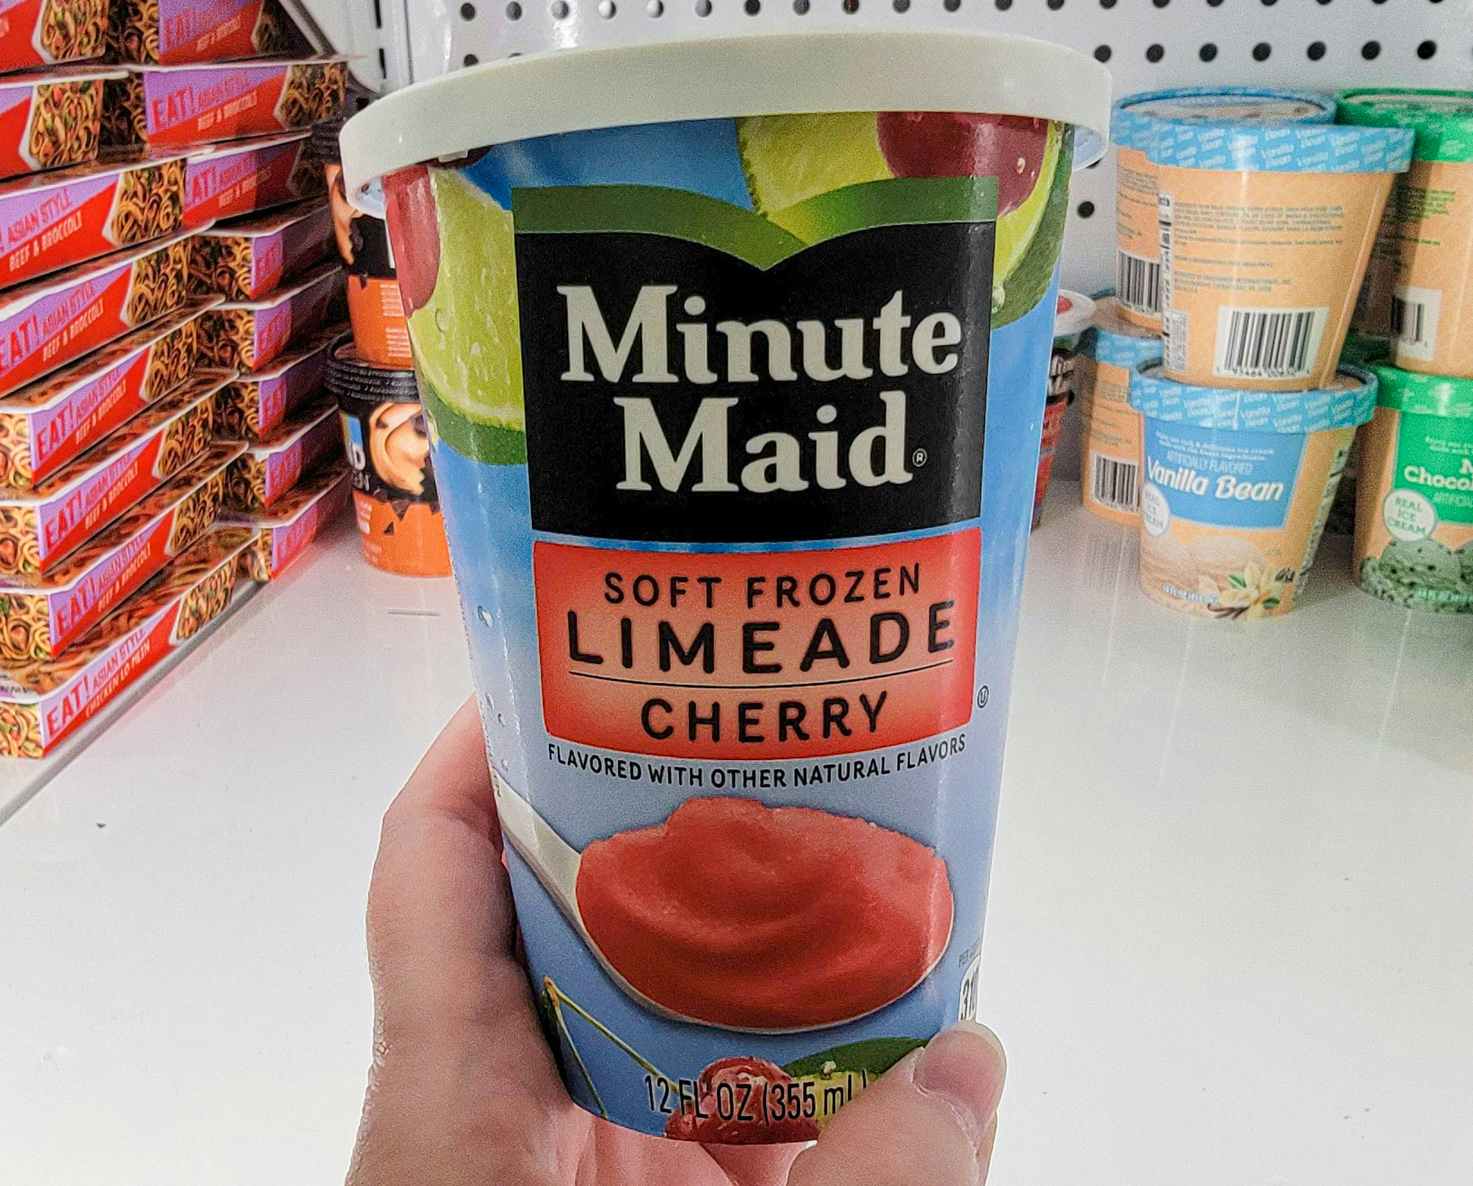 hand holding a tub of minute maid frozen cherry limeade dessert